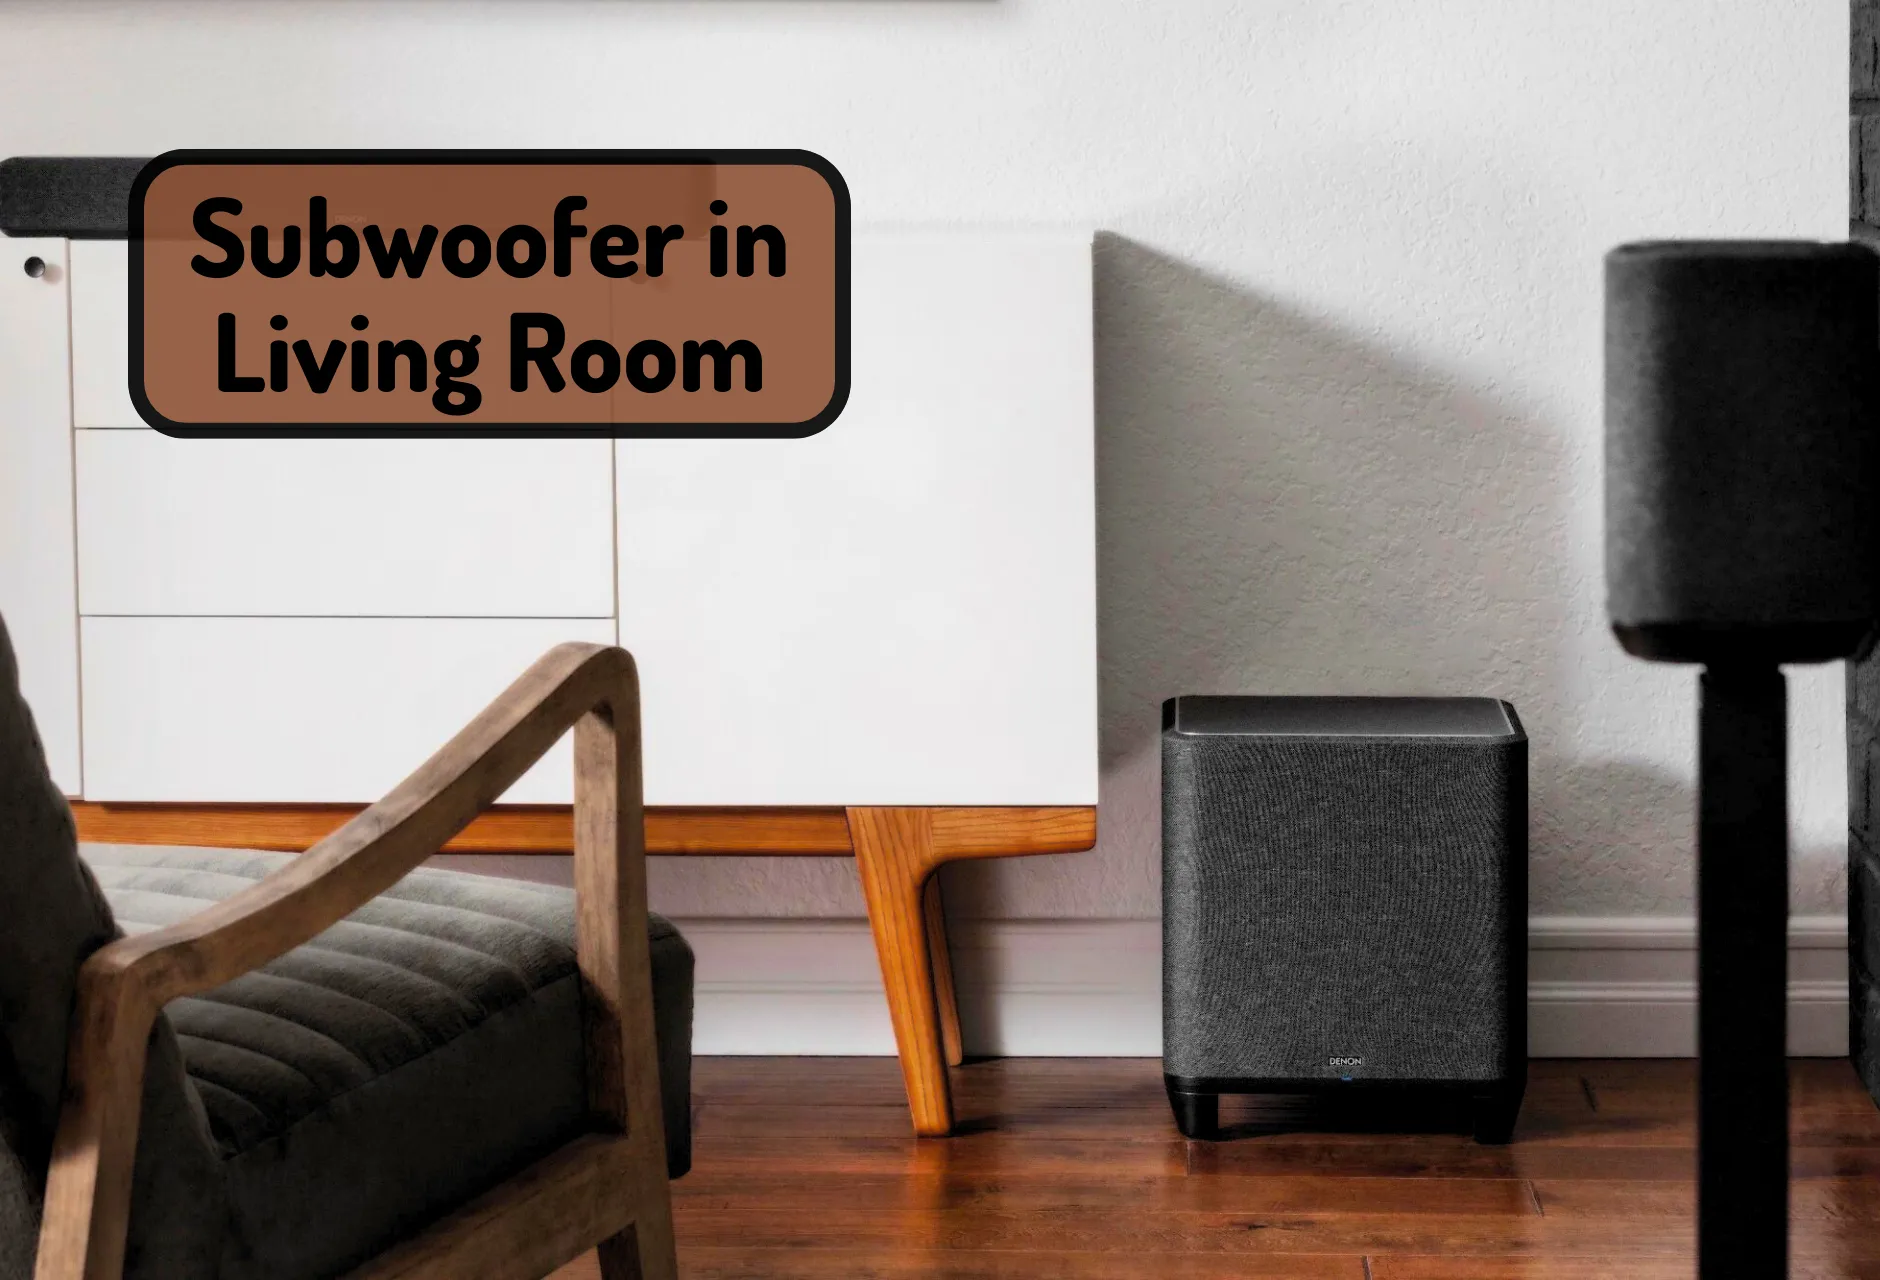 Where to Place Subwoofer in Living Room